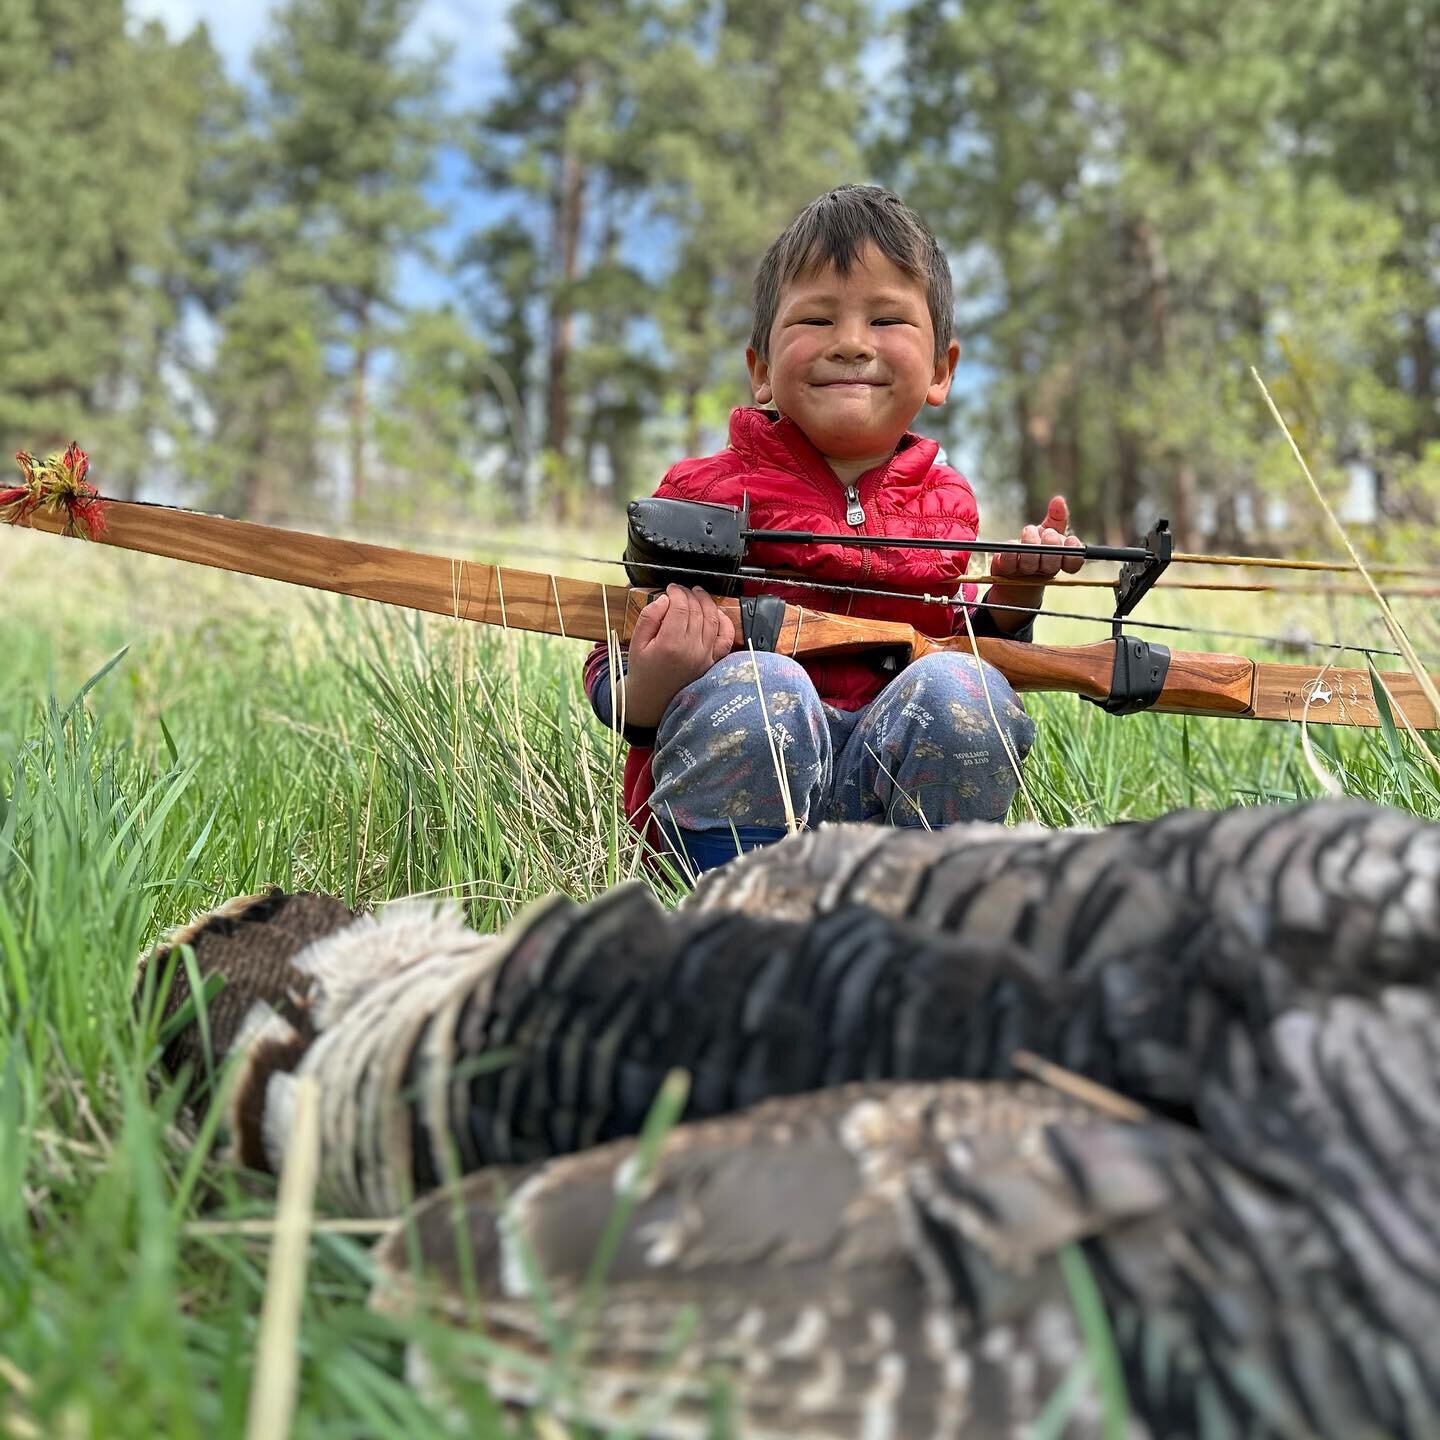 Spring Turkey with the recurve! 🎯🦃Not the biggest Turkey out there but I get considerably less picky when I have the traditional bow. 

I heard these guys in the woods causing a ruckus and snuck over for a shot&hellip;Zaia was able to watch from af